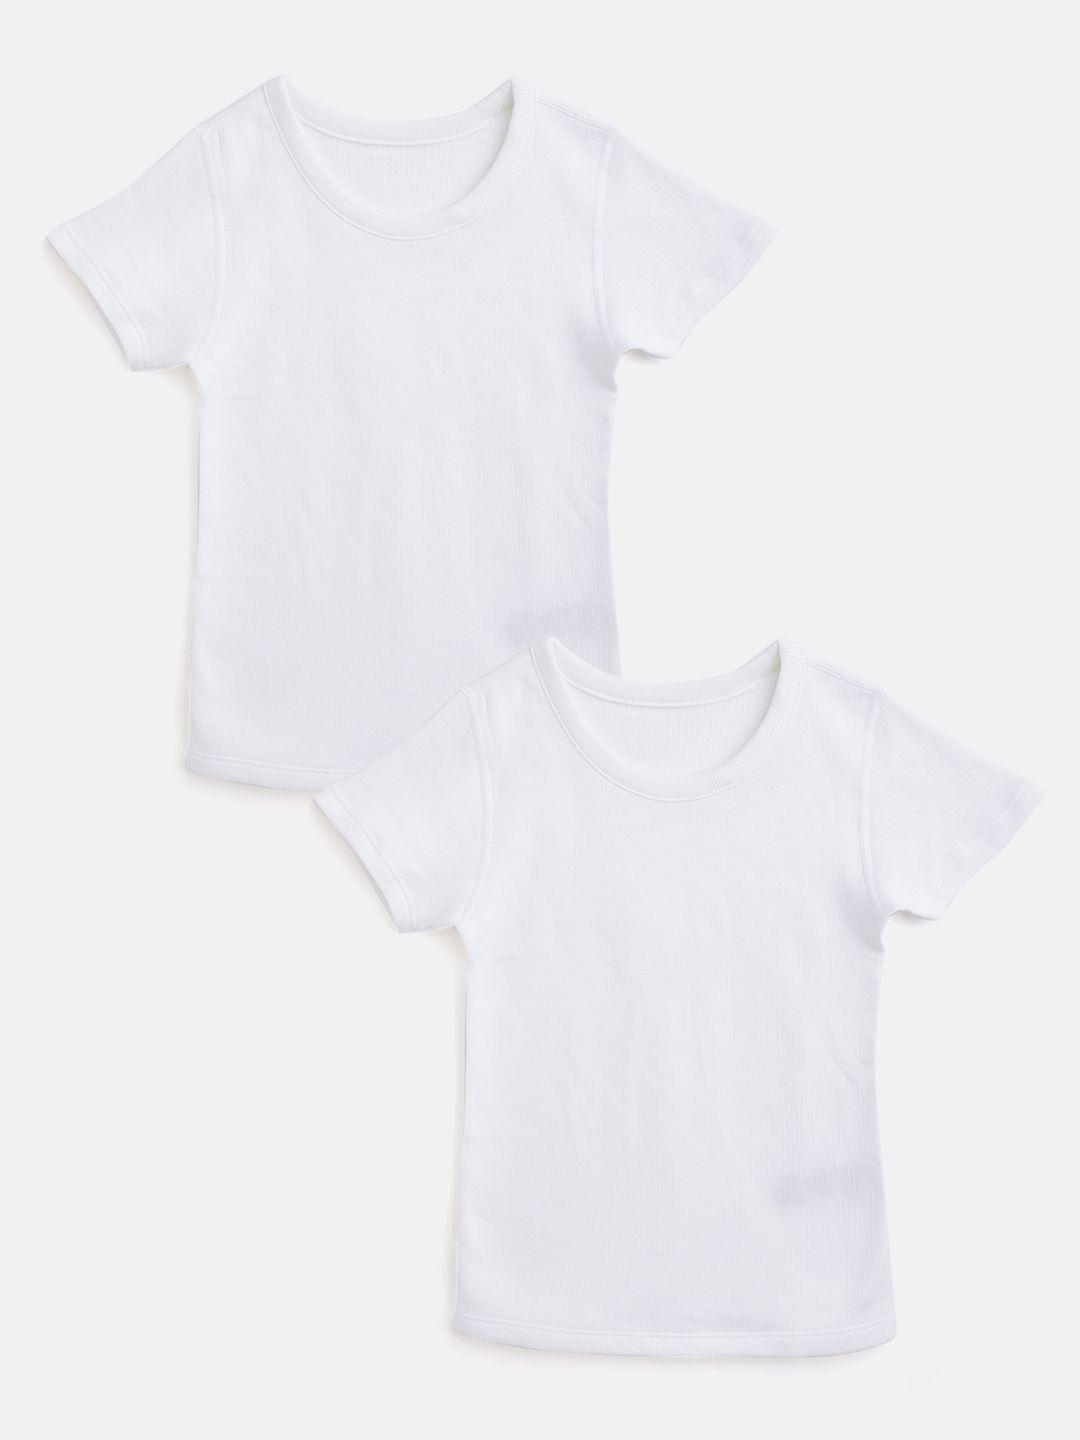 marks & spencer boys pack of 2 white solid thermal t-shirts